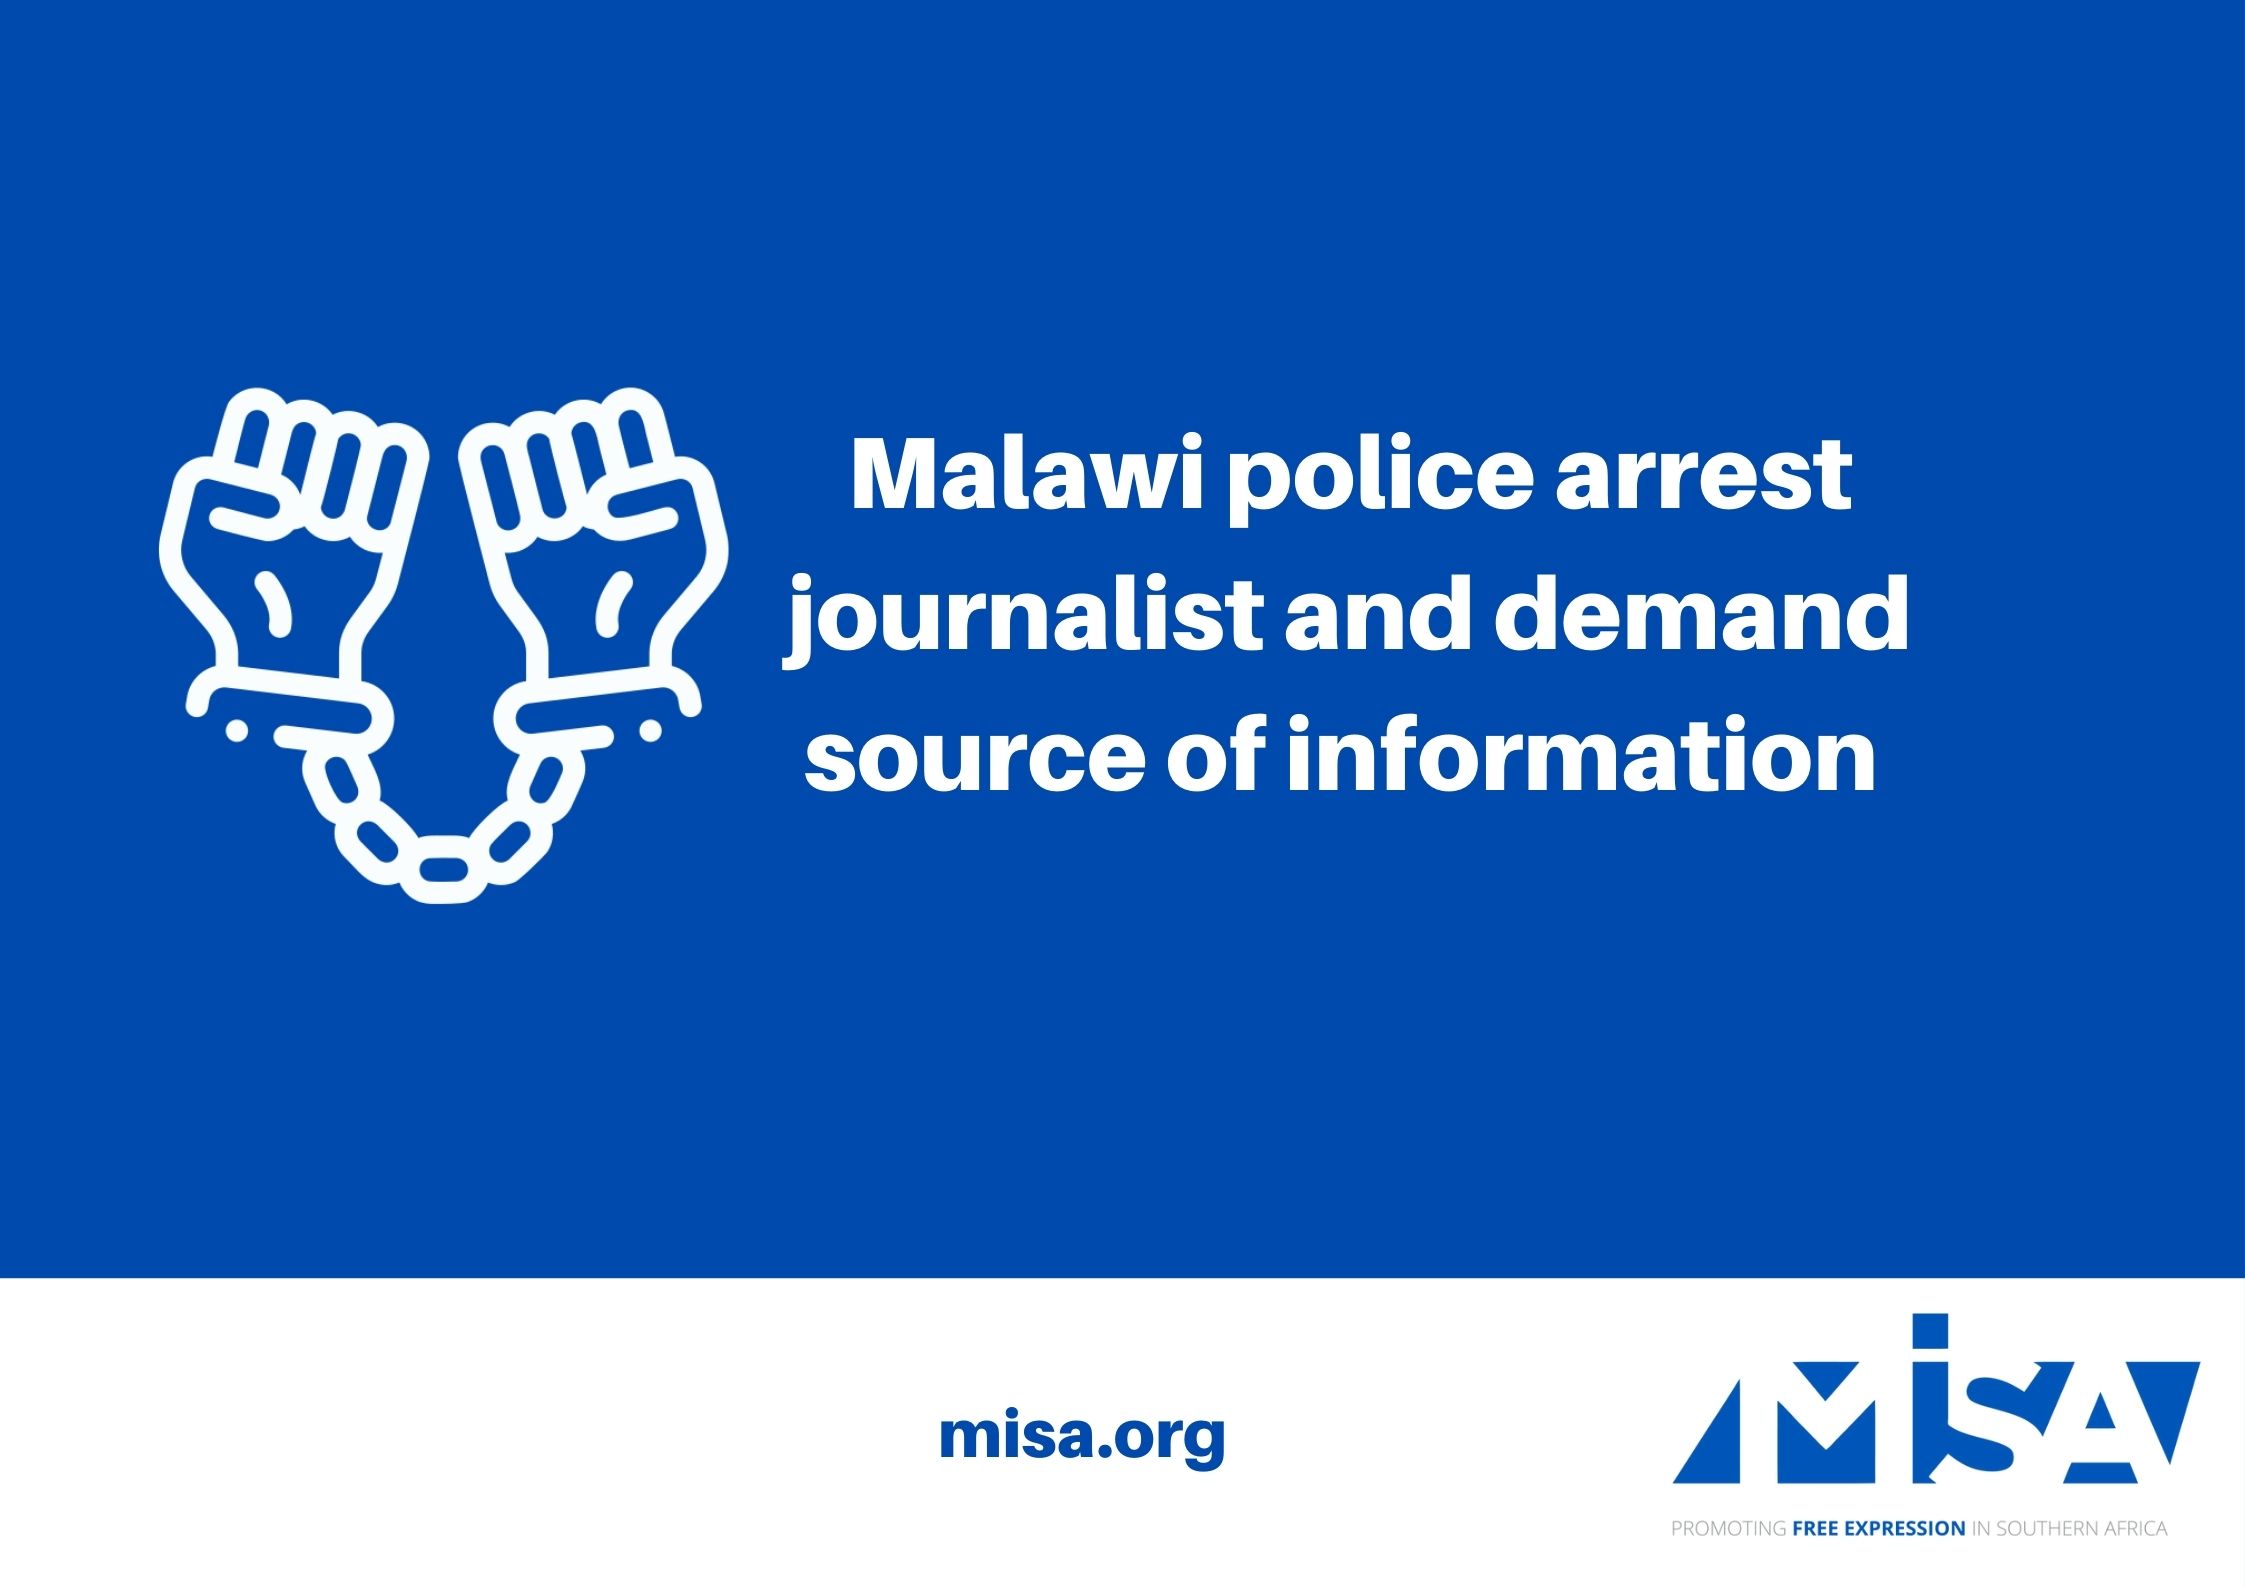 Malawi police arrest journalist and demand source of information